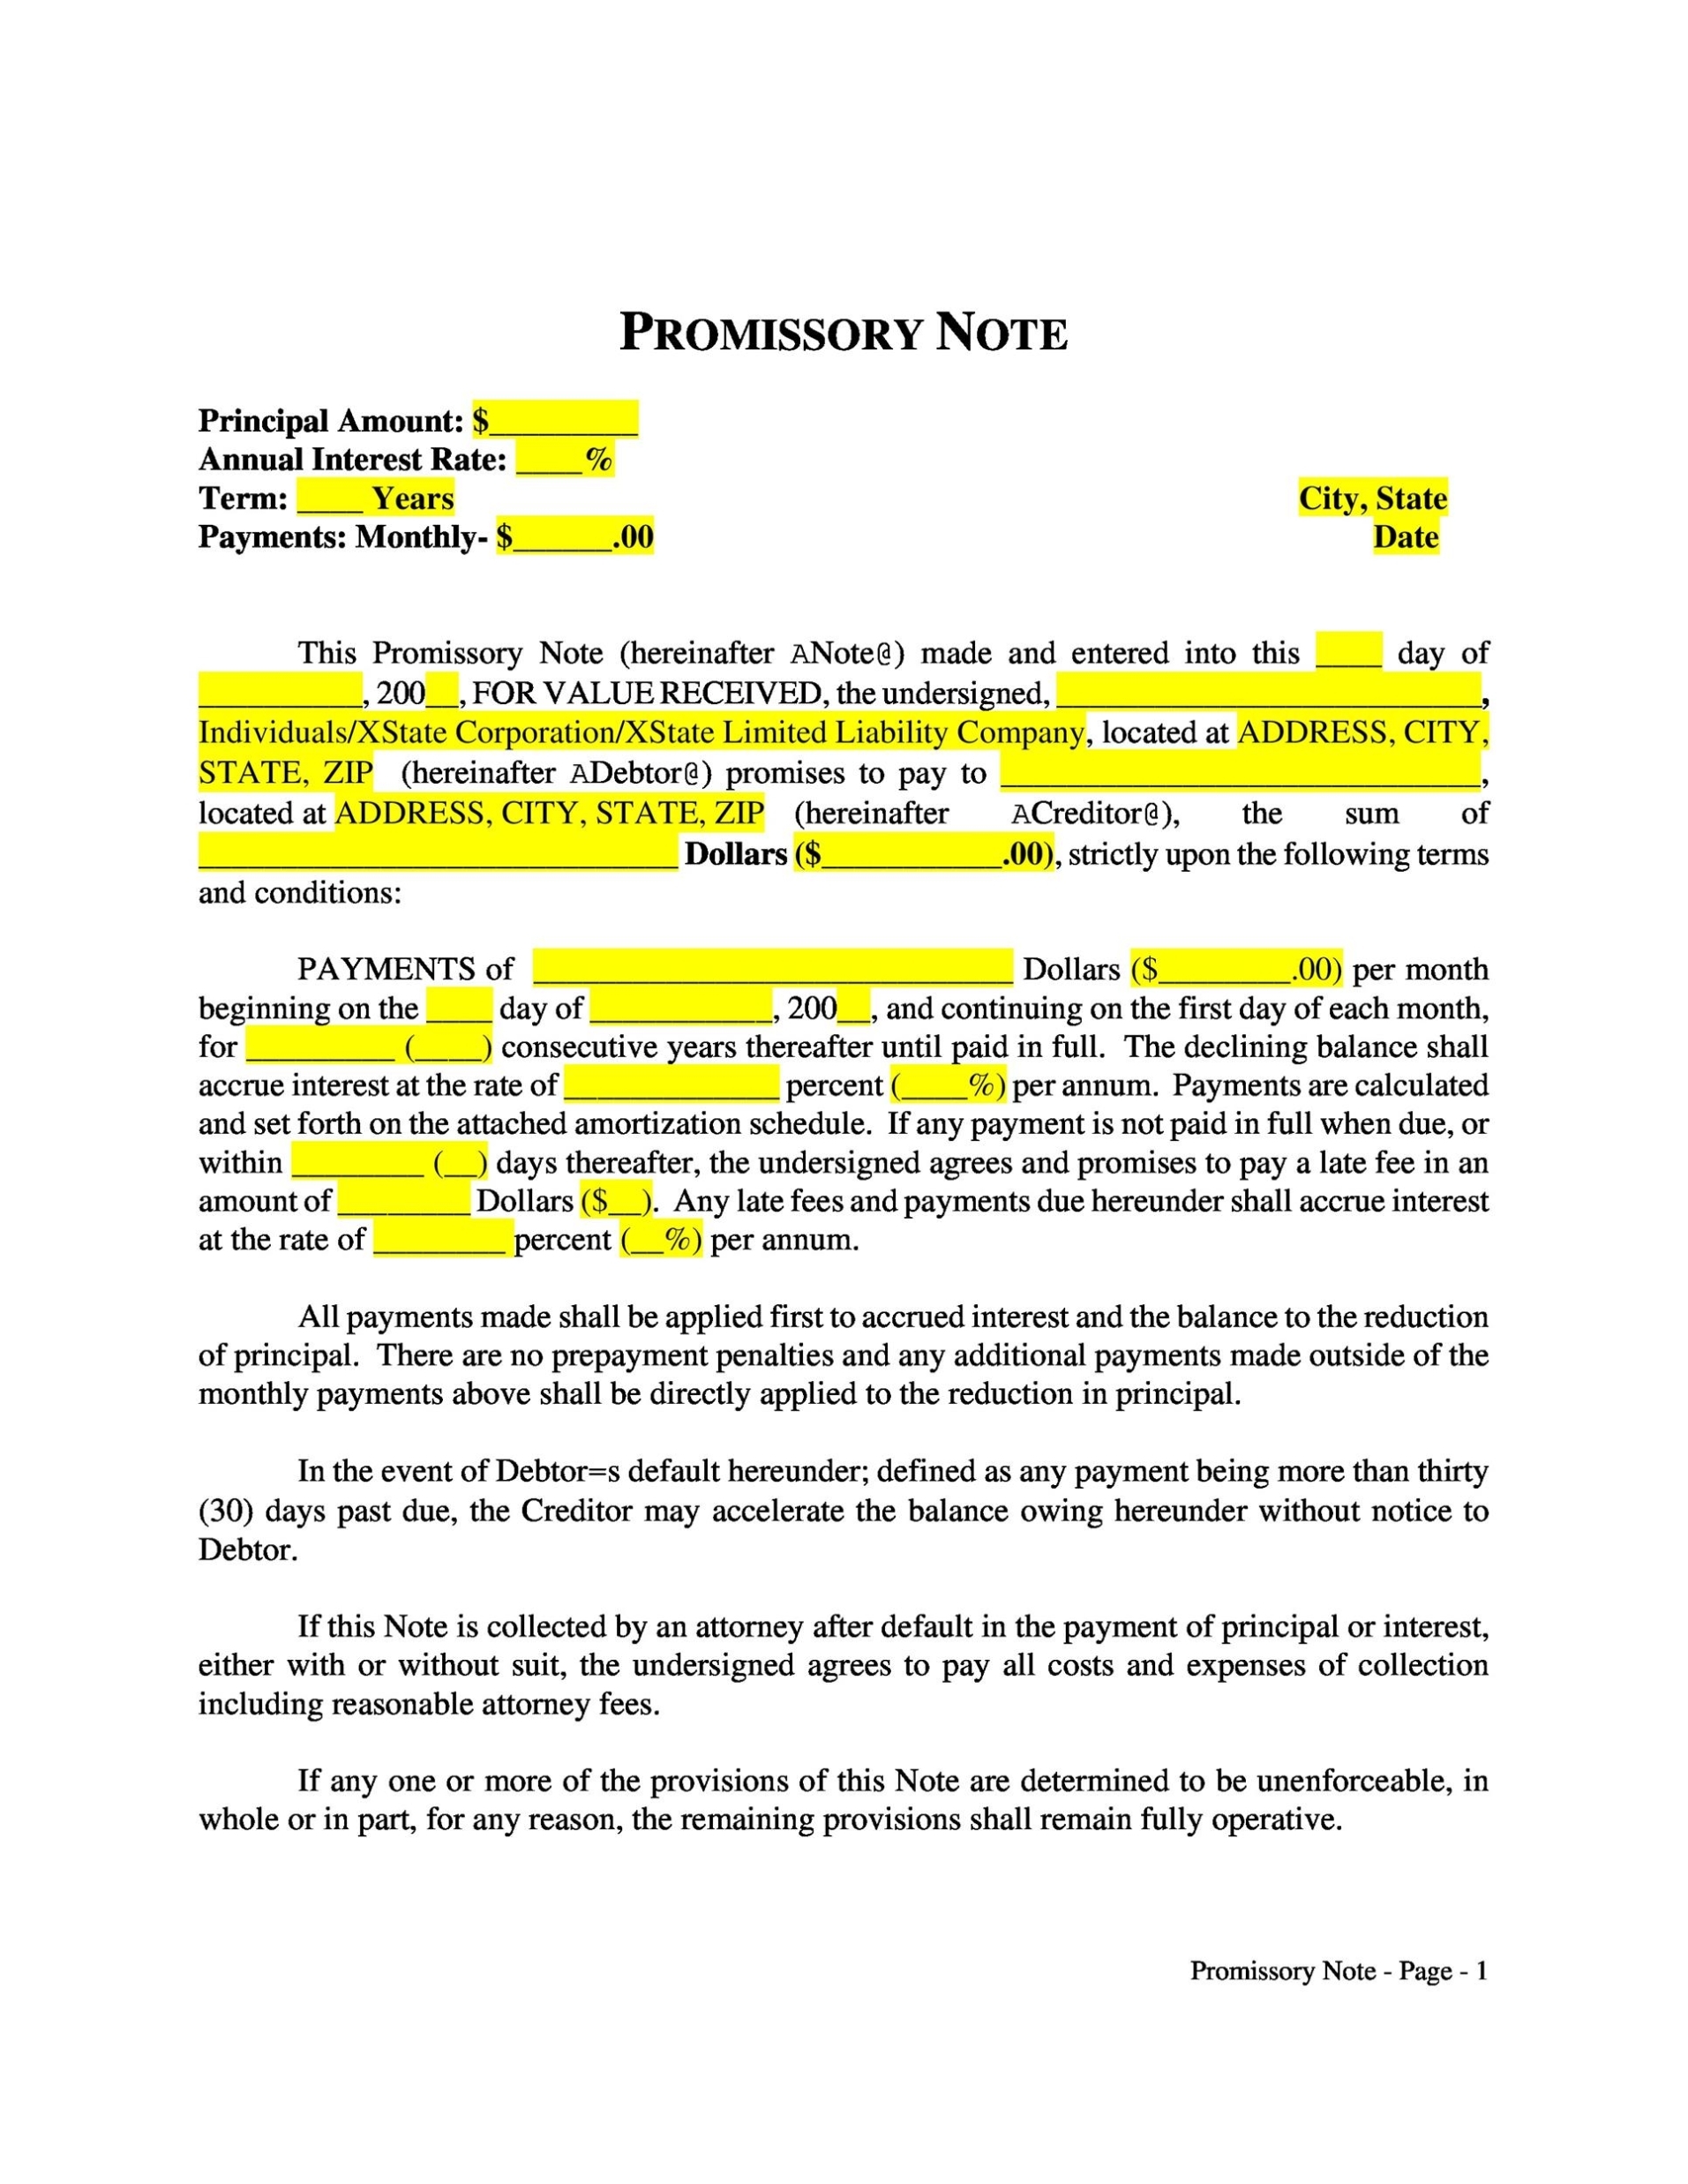 45 Free Promissory Note Templates & Forms [Word & Pdf] ᐅ Templatelab Intended For Free Installment Promissory Note Template